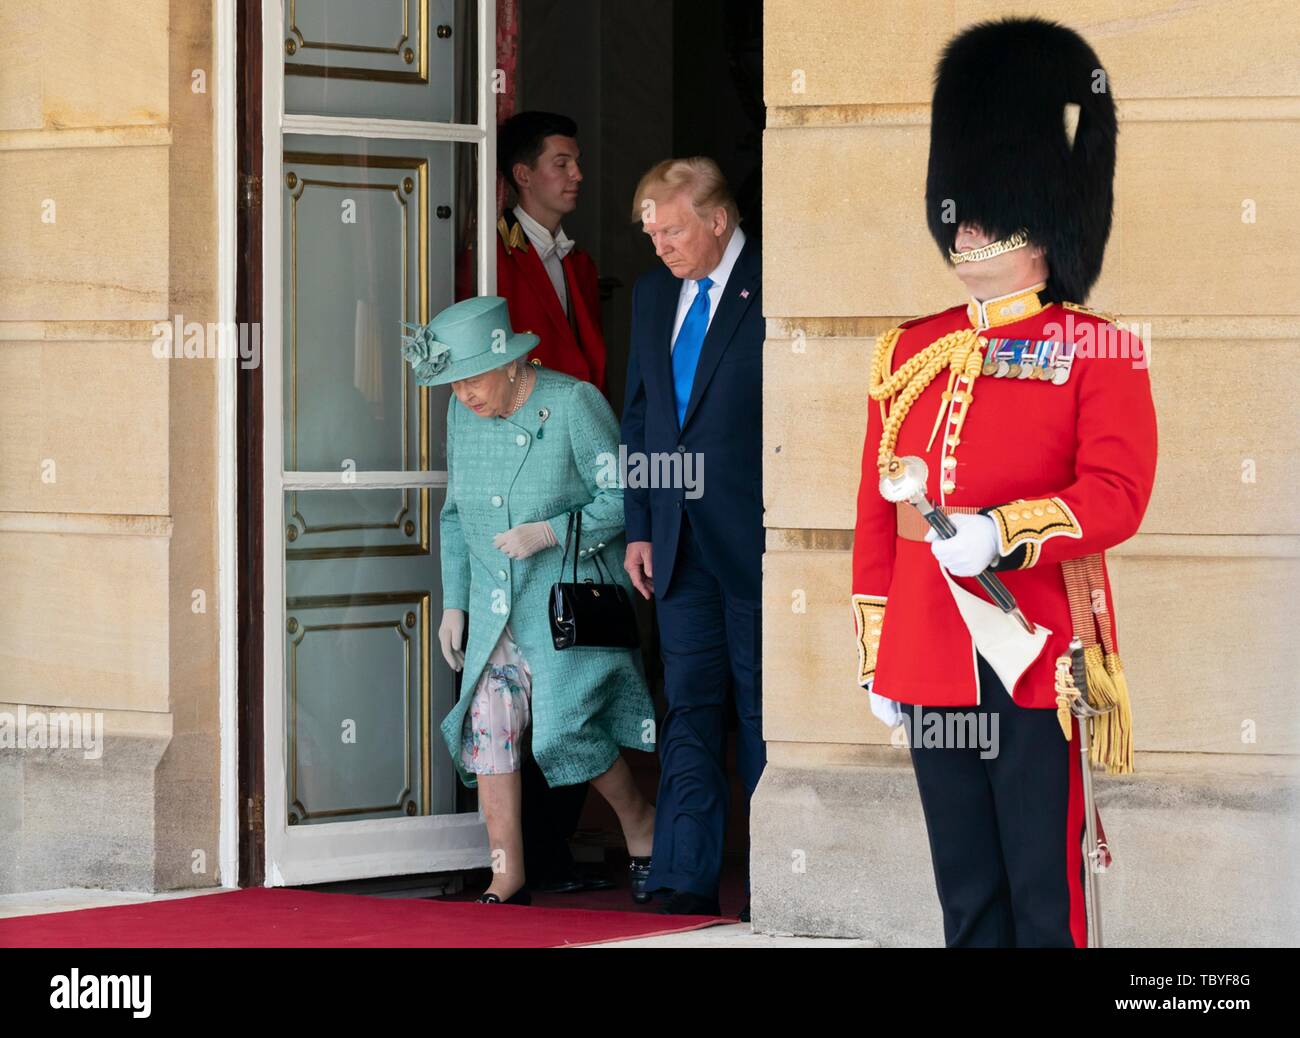 London, UK. 03rd June, 2019. U.S President Donald Trump walks alongside Queen Elizabeth II as they depart Buckingham Palace following the official welcoming ceremony June 3, 2019 in London, England. Credit: Planetpix/Alamy Live News Stock Photo